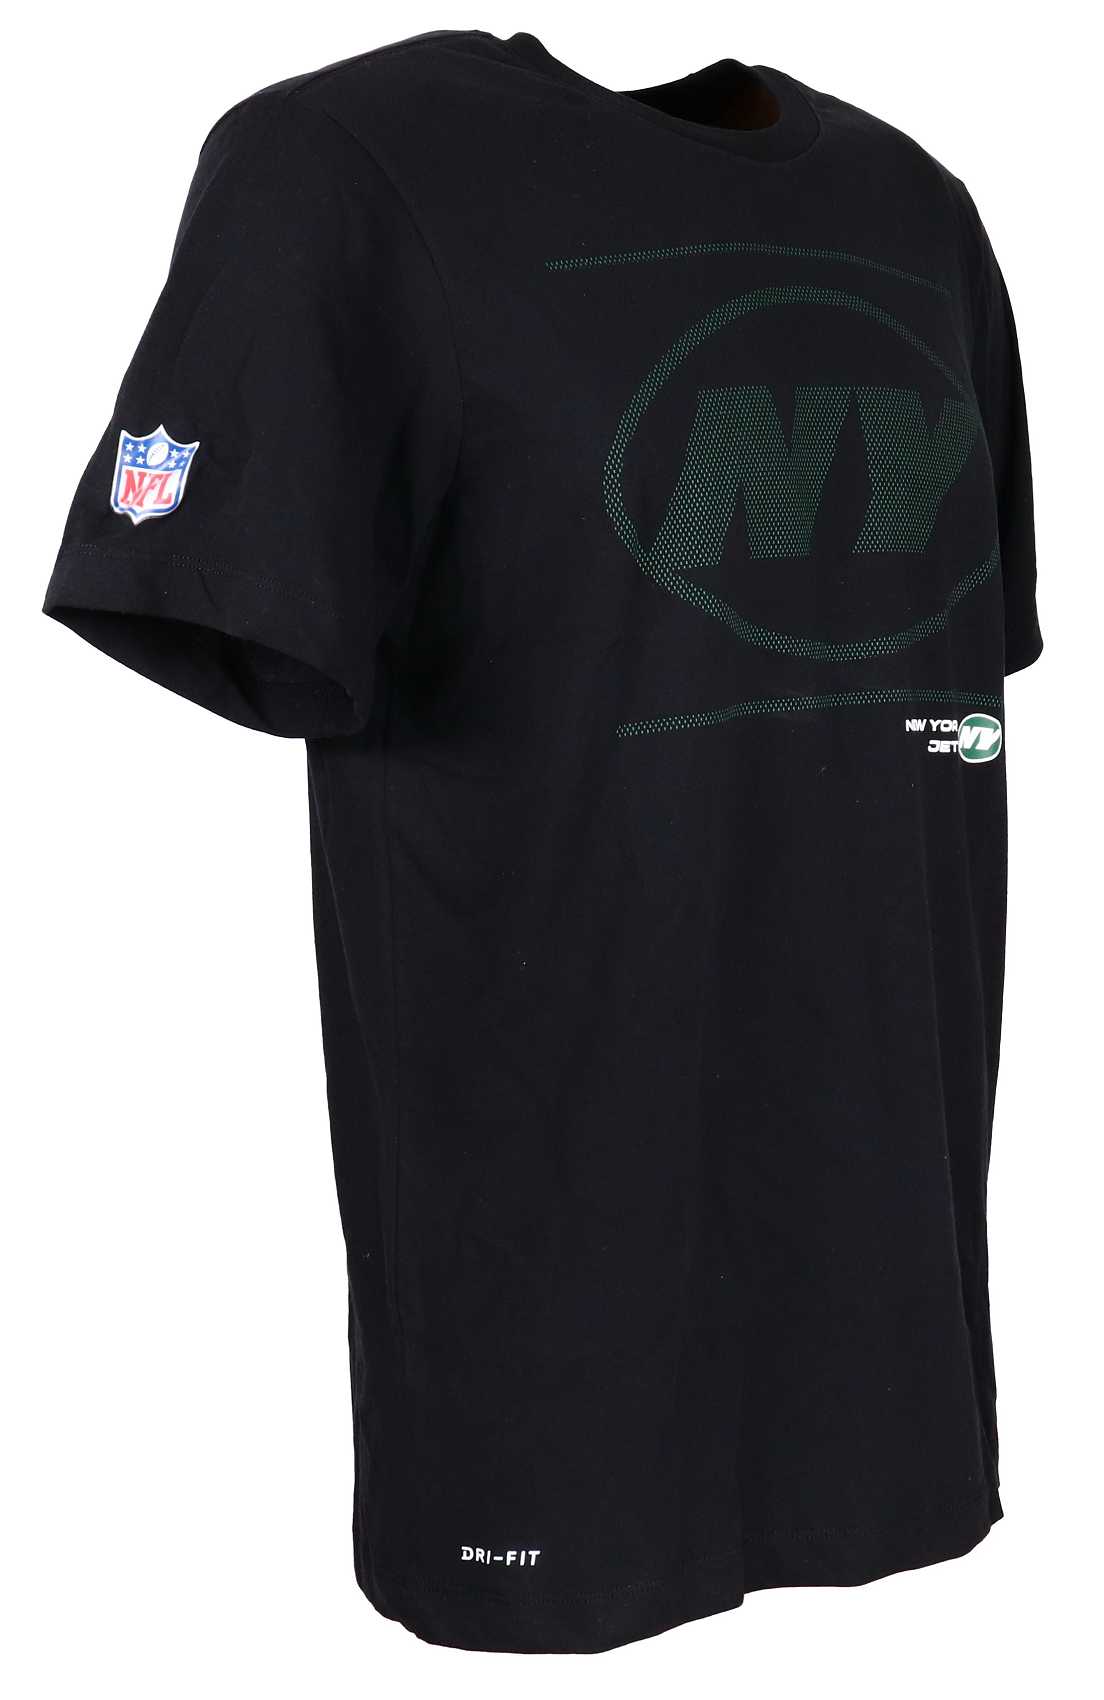 New York Jets NFL DFCT Team Issue Tee Black T-Shirt Nike